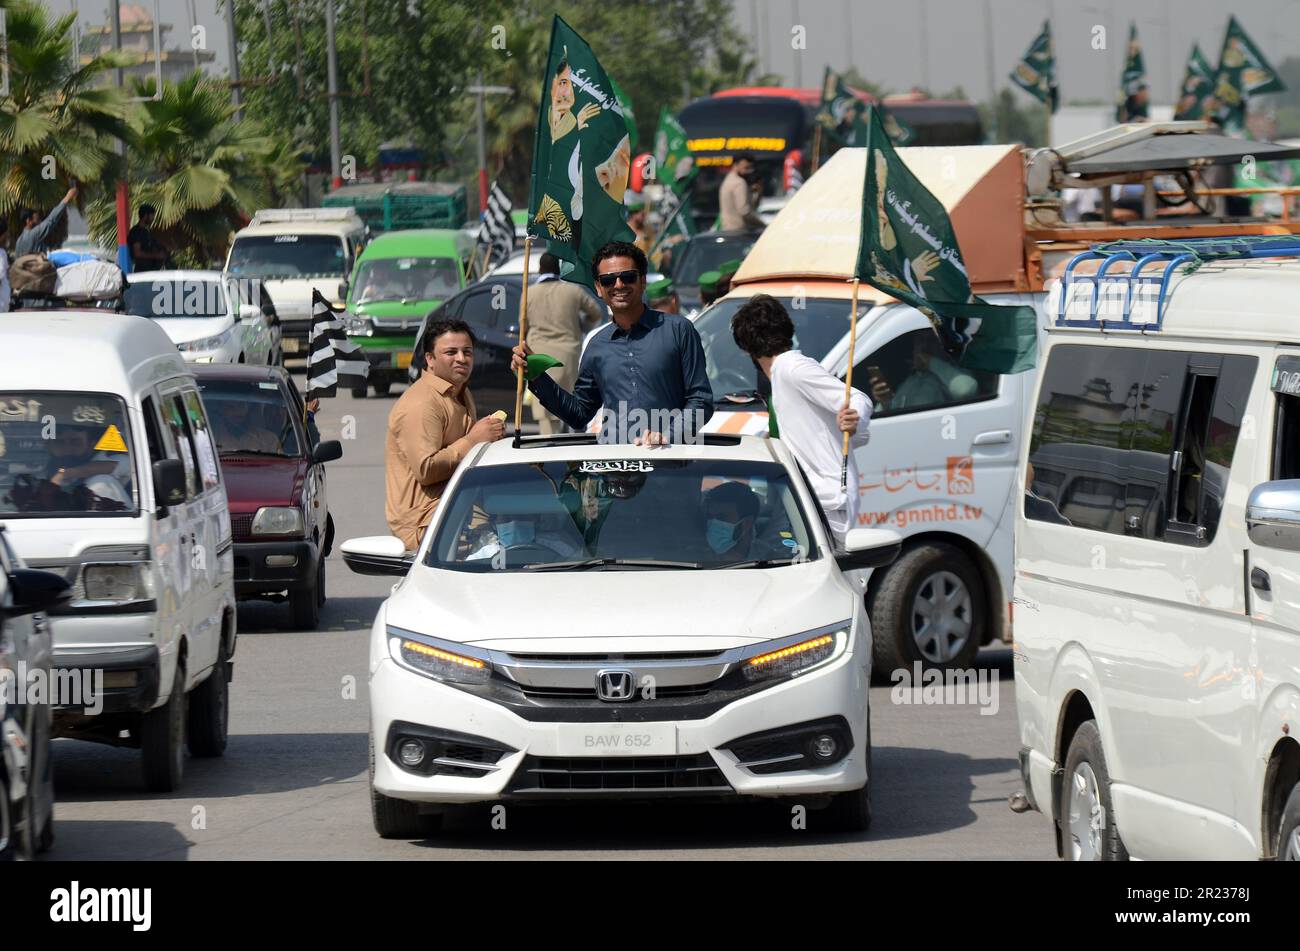 May 15, 2023, Peshawar, Peshawar, Pakistan: Supporters of Islamic political party Jamiat Ulma-e-Islam, part of ruling coalition of Pakistan Democratic Movement (PDM) leave to join a protest outside the Supreme Court, following release of opposition party PTI head and former Prime Minister Imran Khan by courts. Pakistani opposition got a major relief on 11 May when the supreme court ordered the release of the former prime minister, Imran Khan, two days after his arrest. Khan was held by the paramilitary troopers on 09 May from a court complex in the capital, sparking violent protests with clash Stock Photo